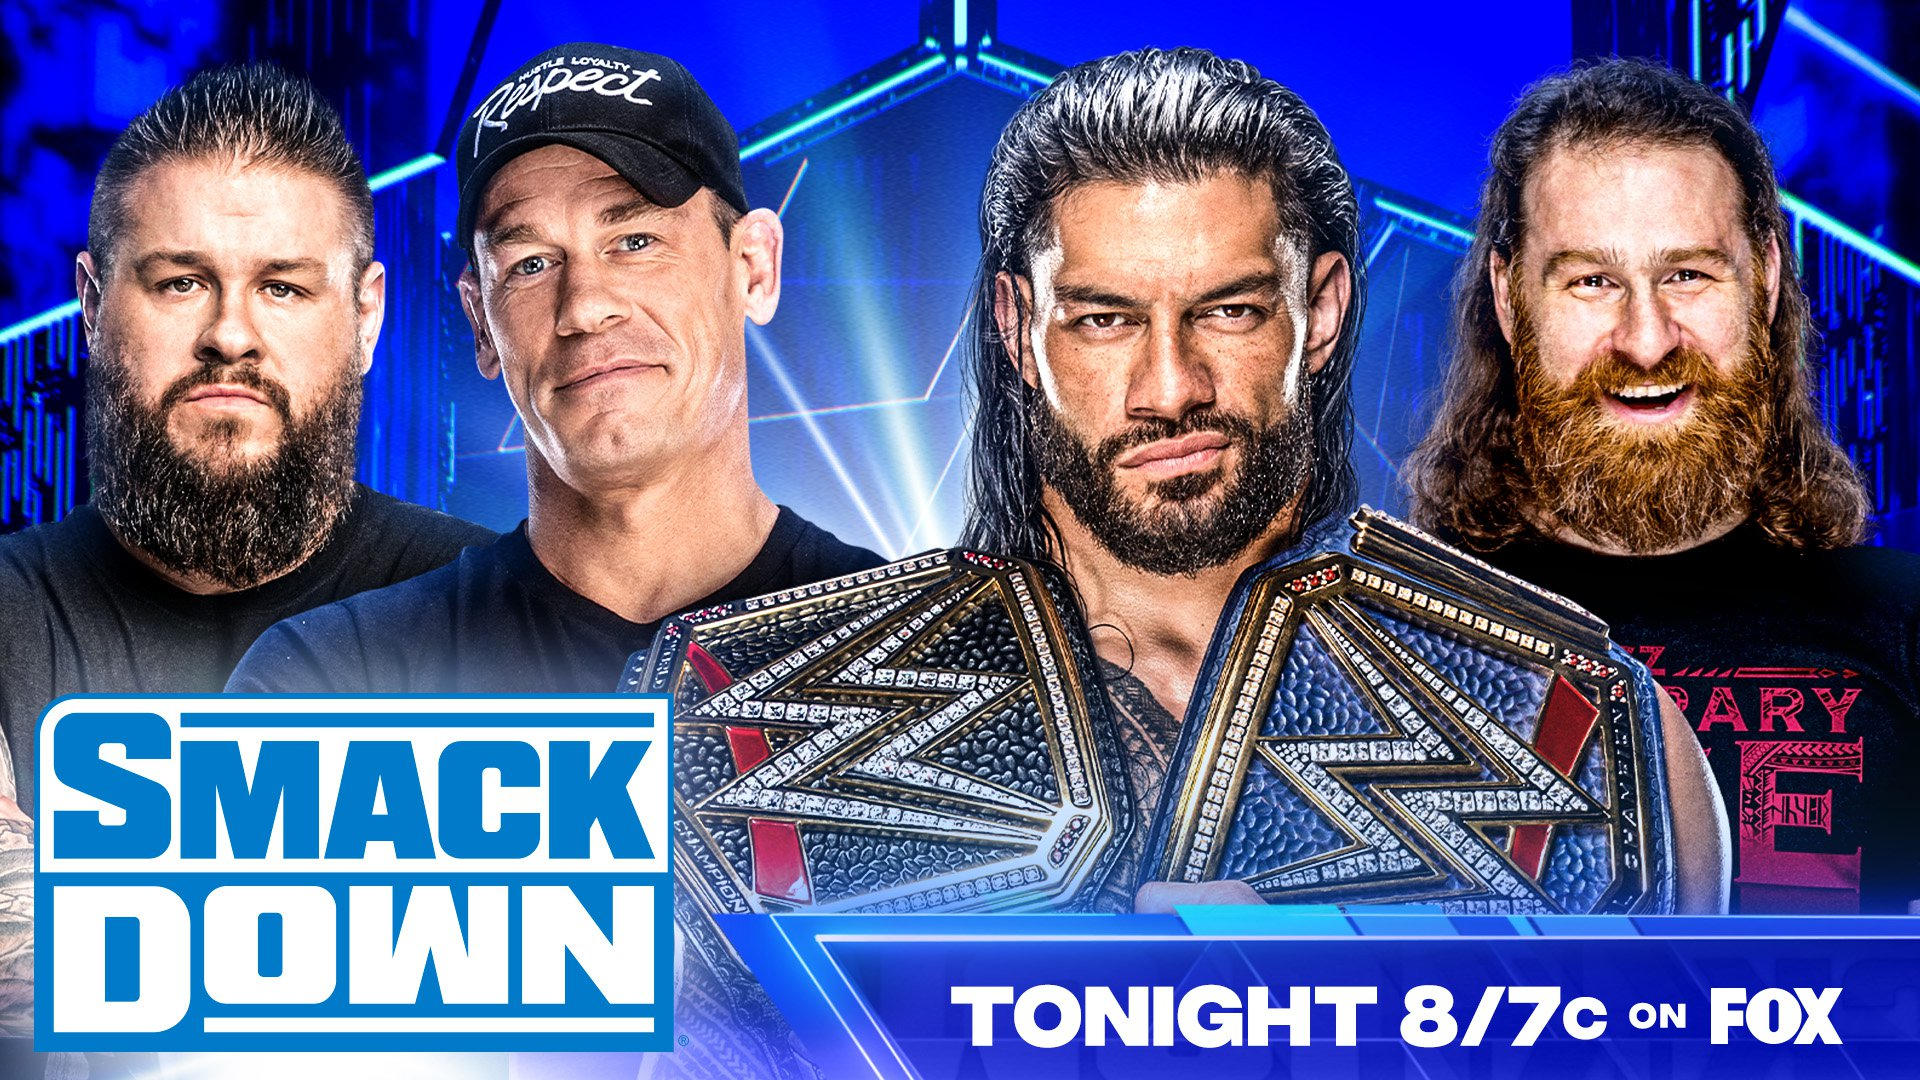 SmackDown ratings rise as Kevin Owens and John Cena wrestle Roman Reigns and Sami Zayn | WWE SmackDown Tonight